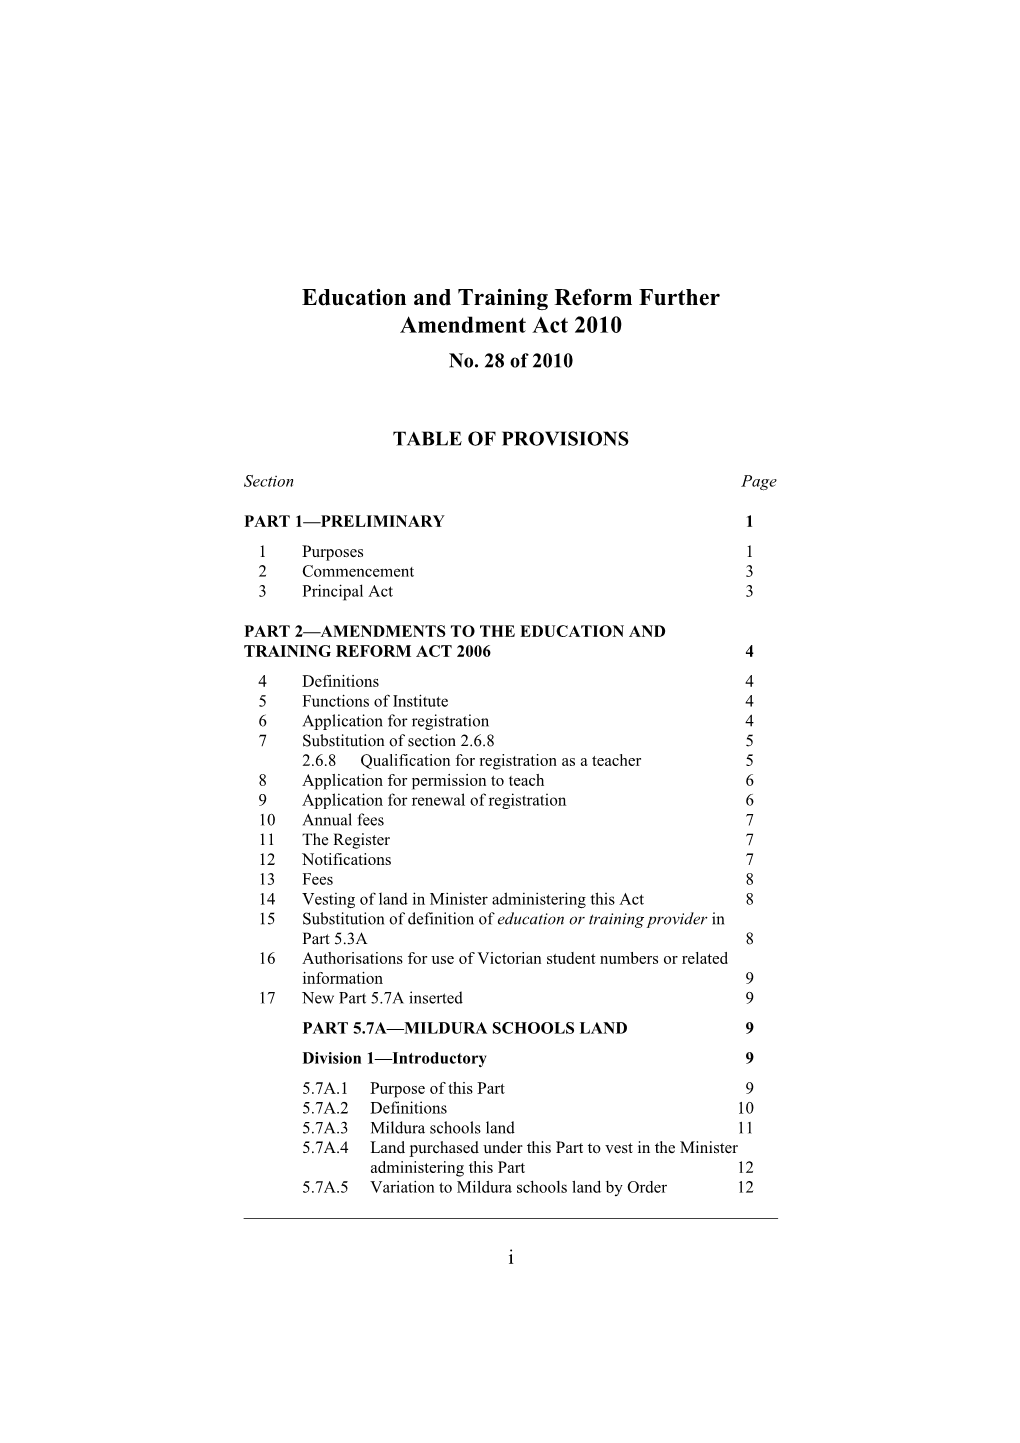 Education and Training Reform Further Amendment Act 2010